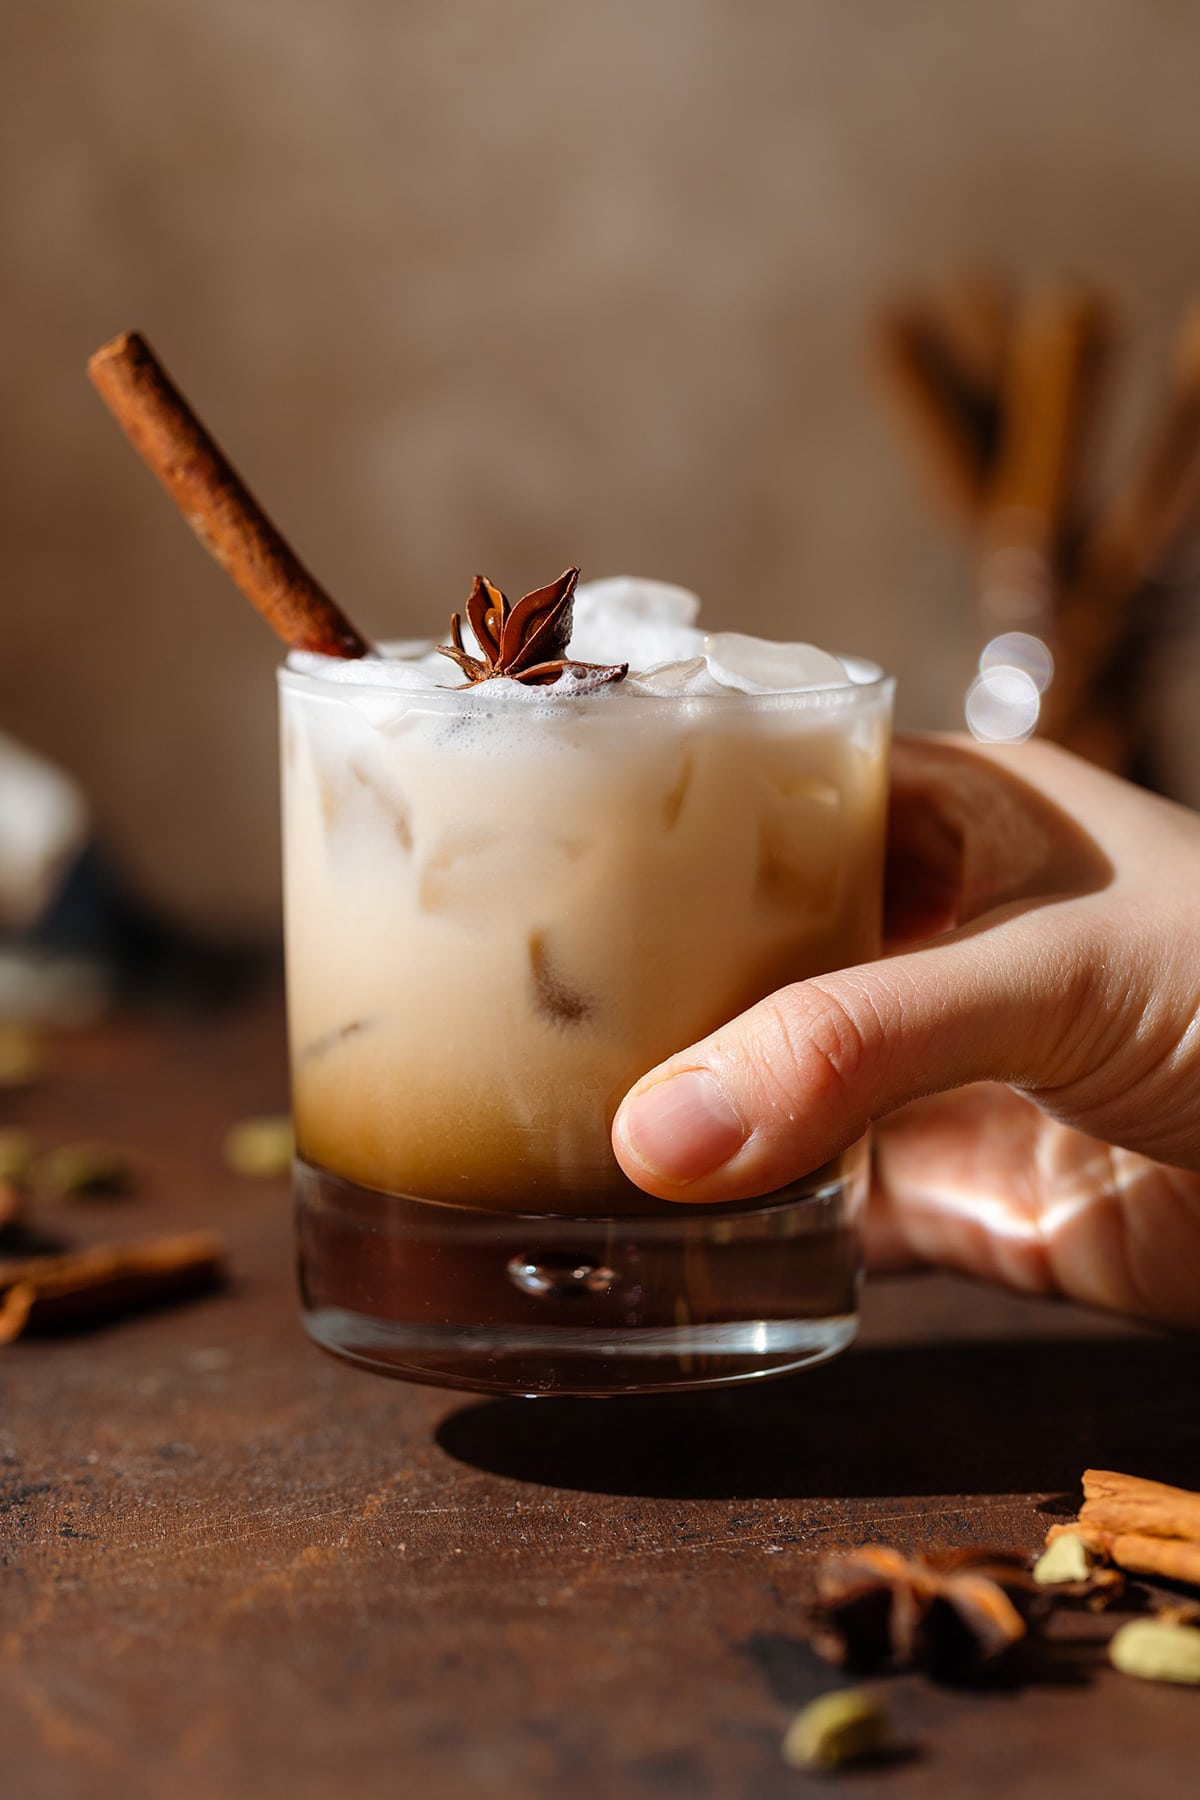 A hand holding a White Russian cocktail in a double old fashioned glass garnished with a cinnamon stick and star anise on a wooden backdrop.